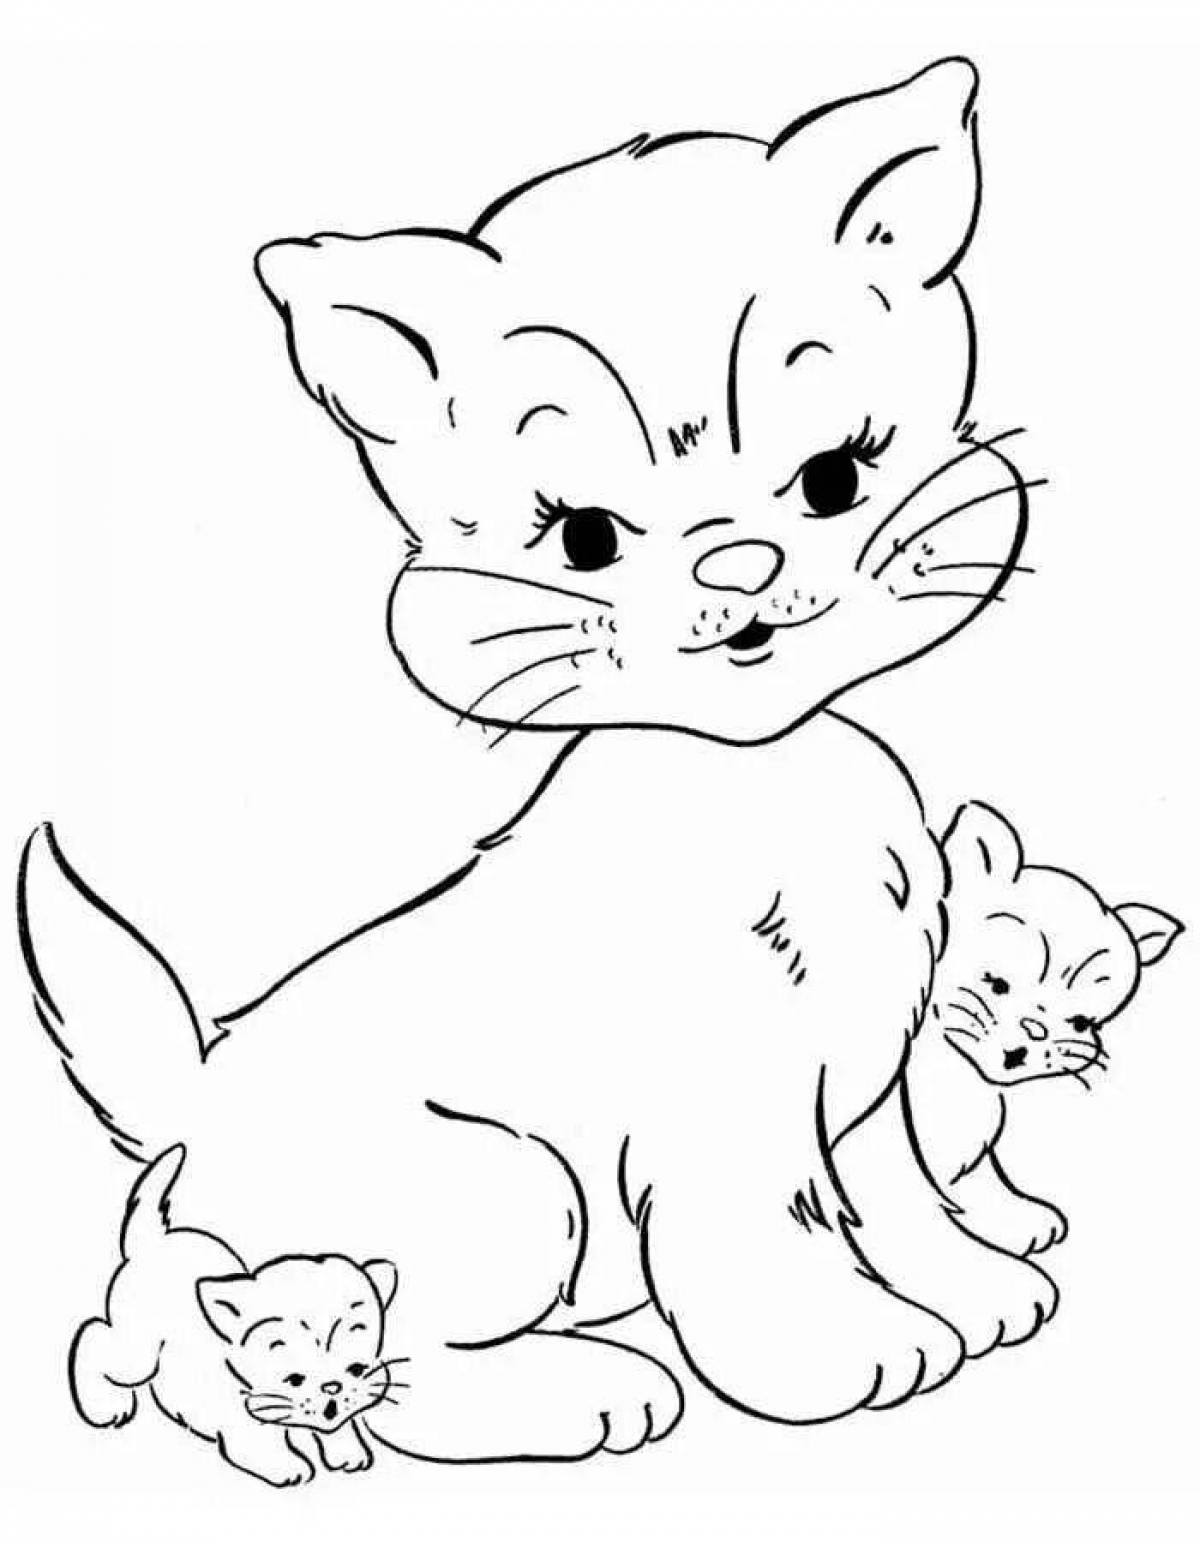 Coloring page friendly cat for kids